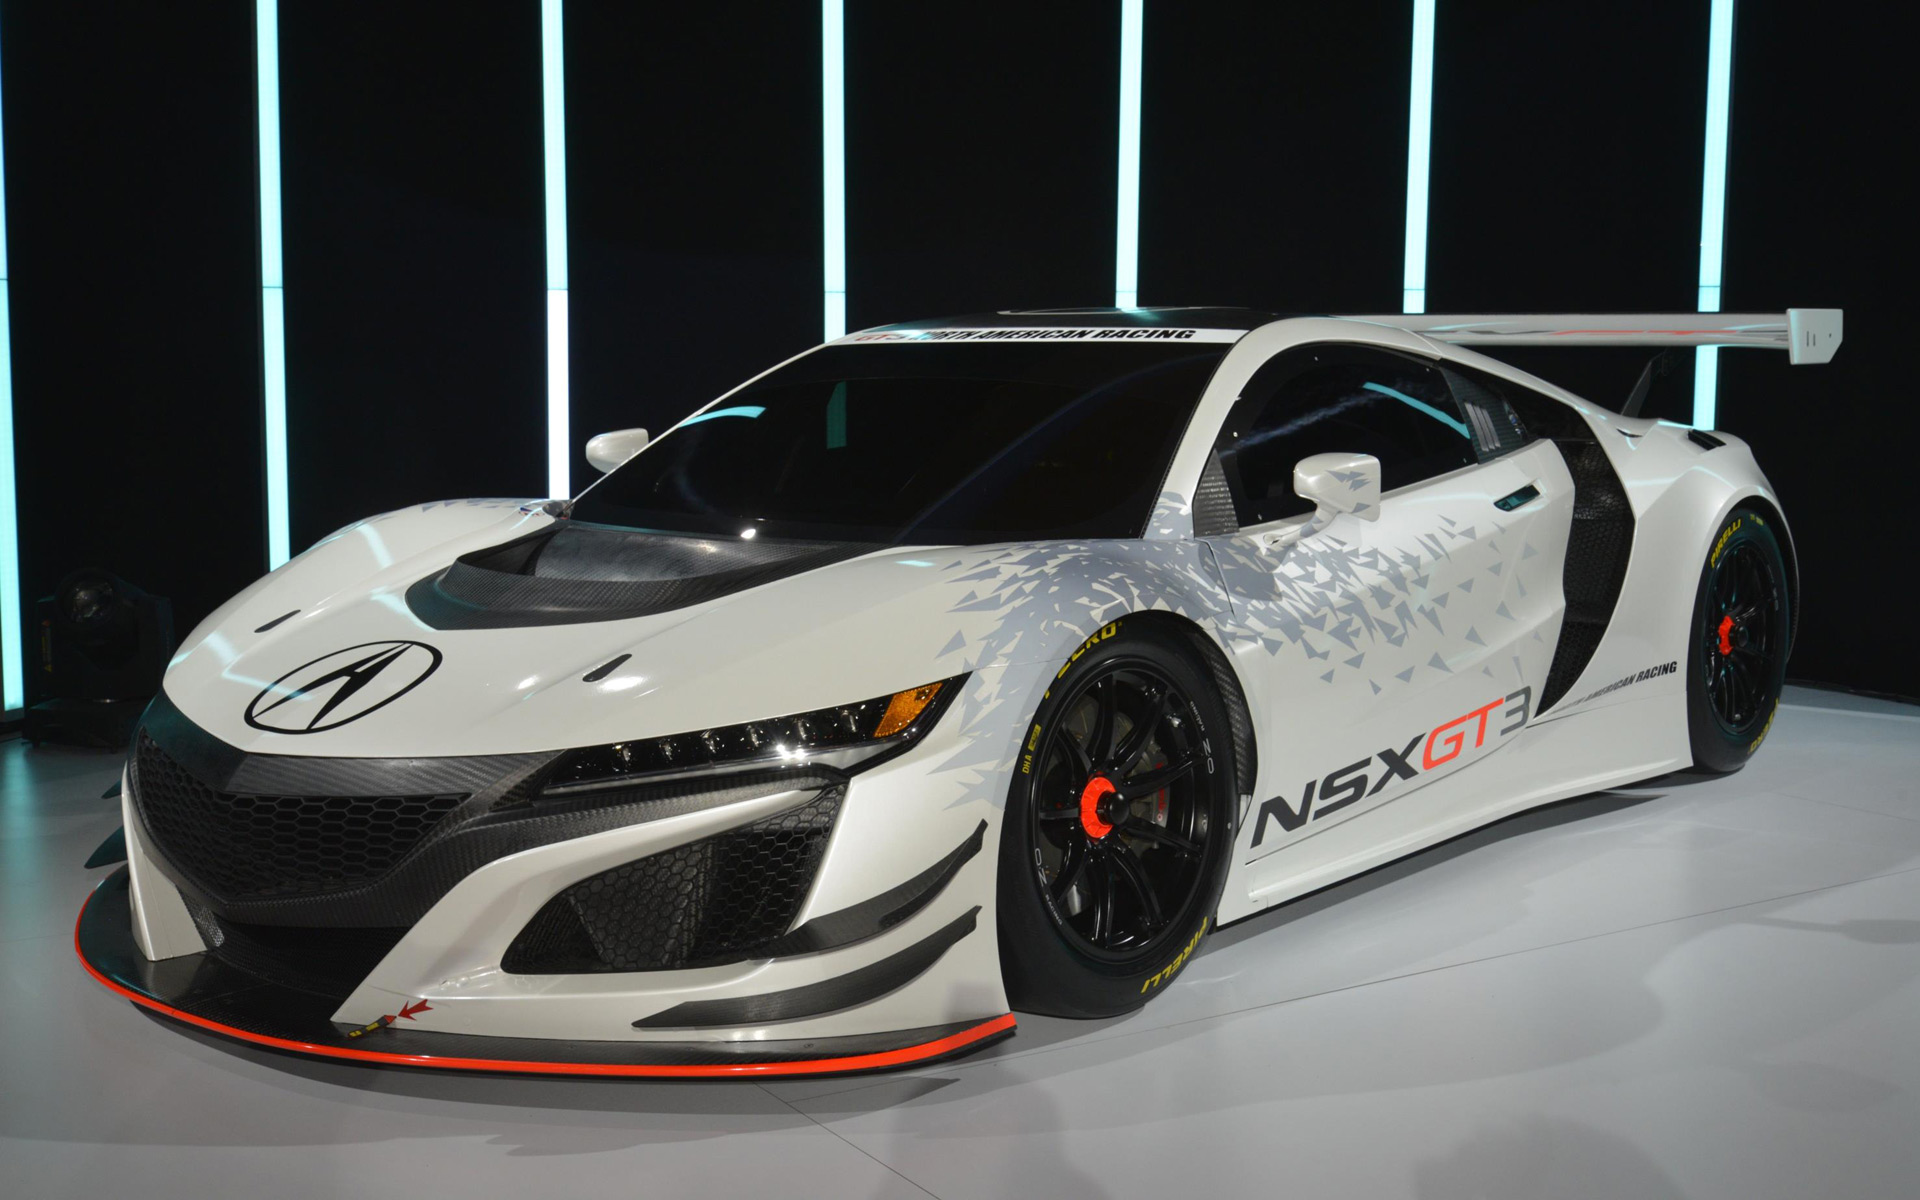 2017 Acura NSX GT3 races into New York: Live photos and video